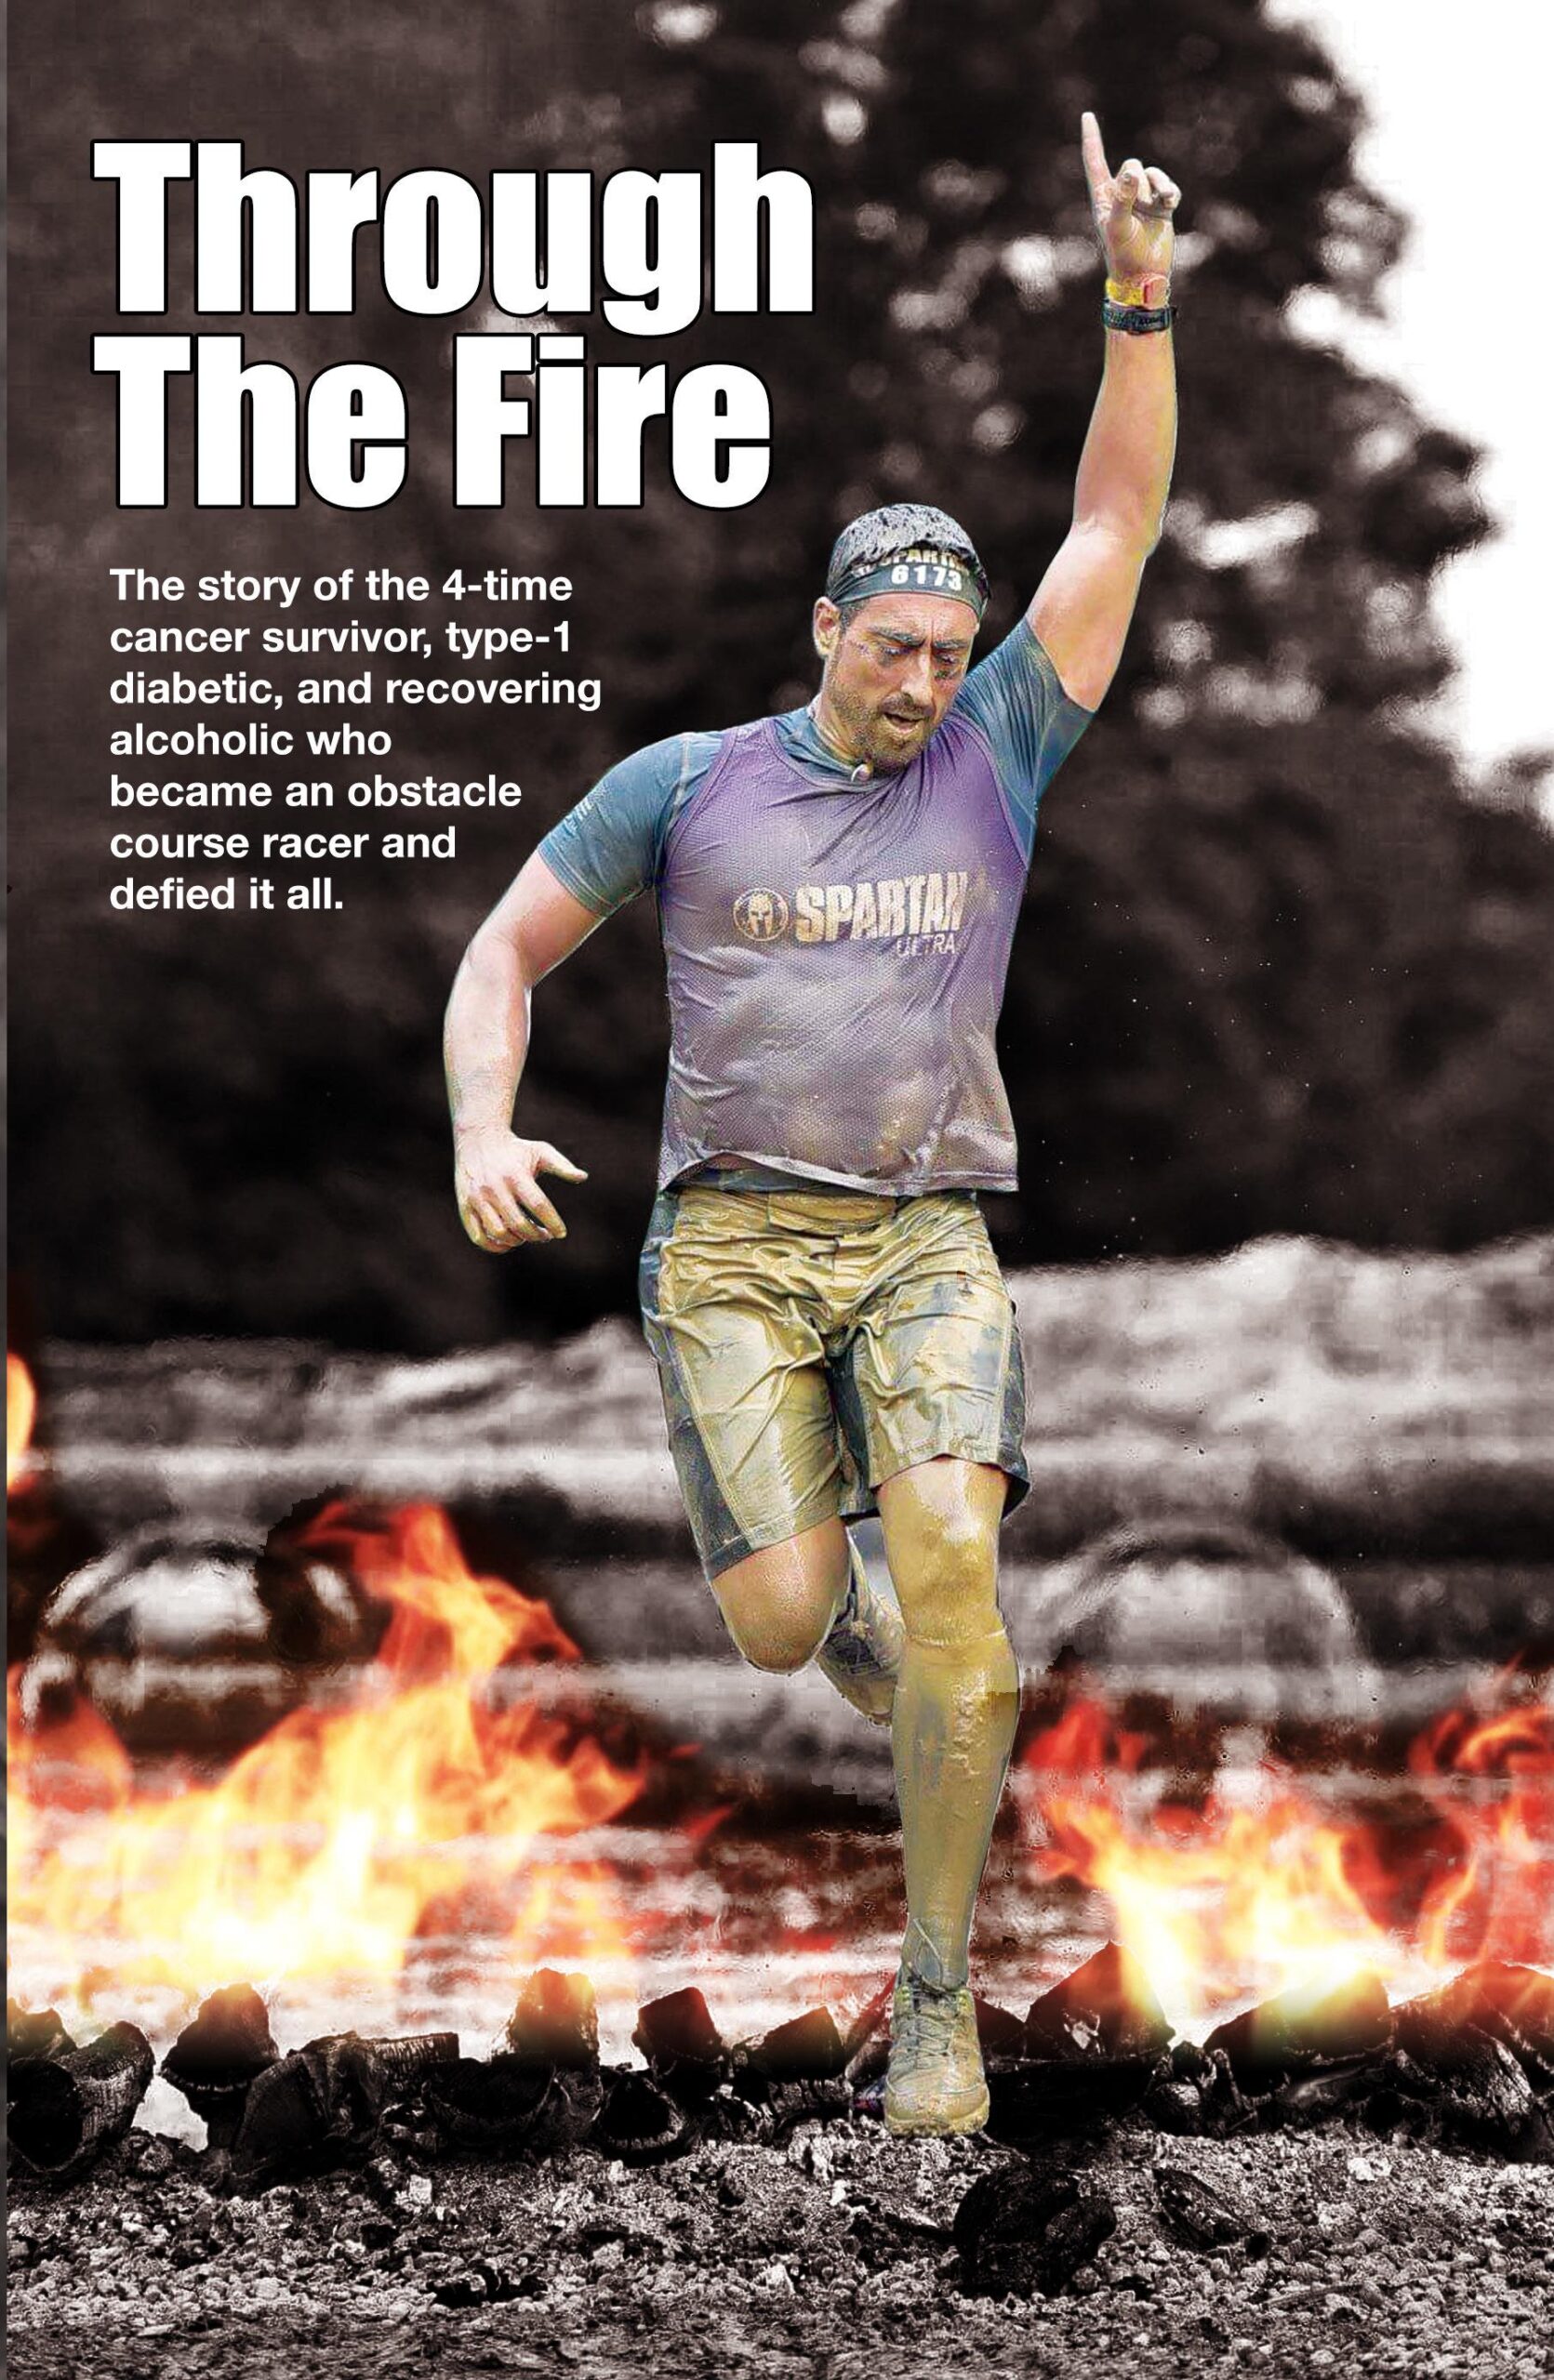 FREE: THROUGH THE FIRE : The story of the 4-time cancer survivor, type-1 diabetic, and recovering alcoholic who became an obstacle course racer and defied it all. by Nick Klingensmith